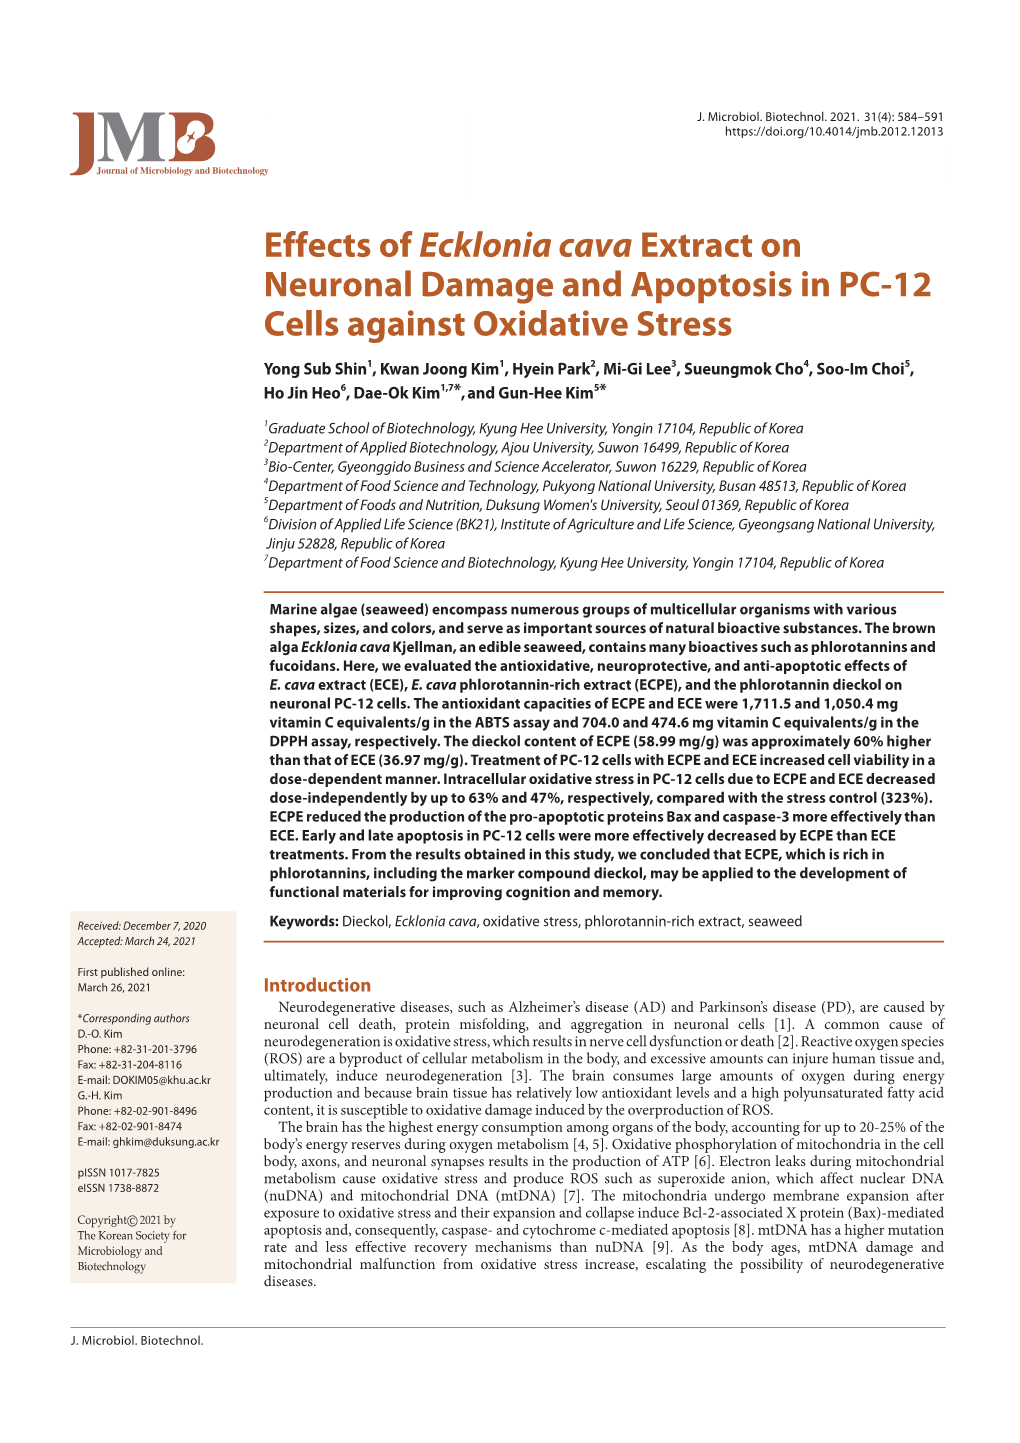 Effects of Ecklonia Cava Extract on Neuronal Damage and Apoptosis in PC-12 Cells Against Oxidative Stress